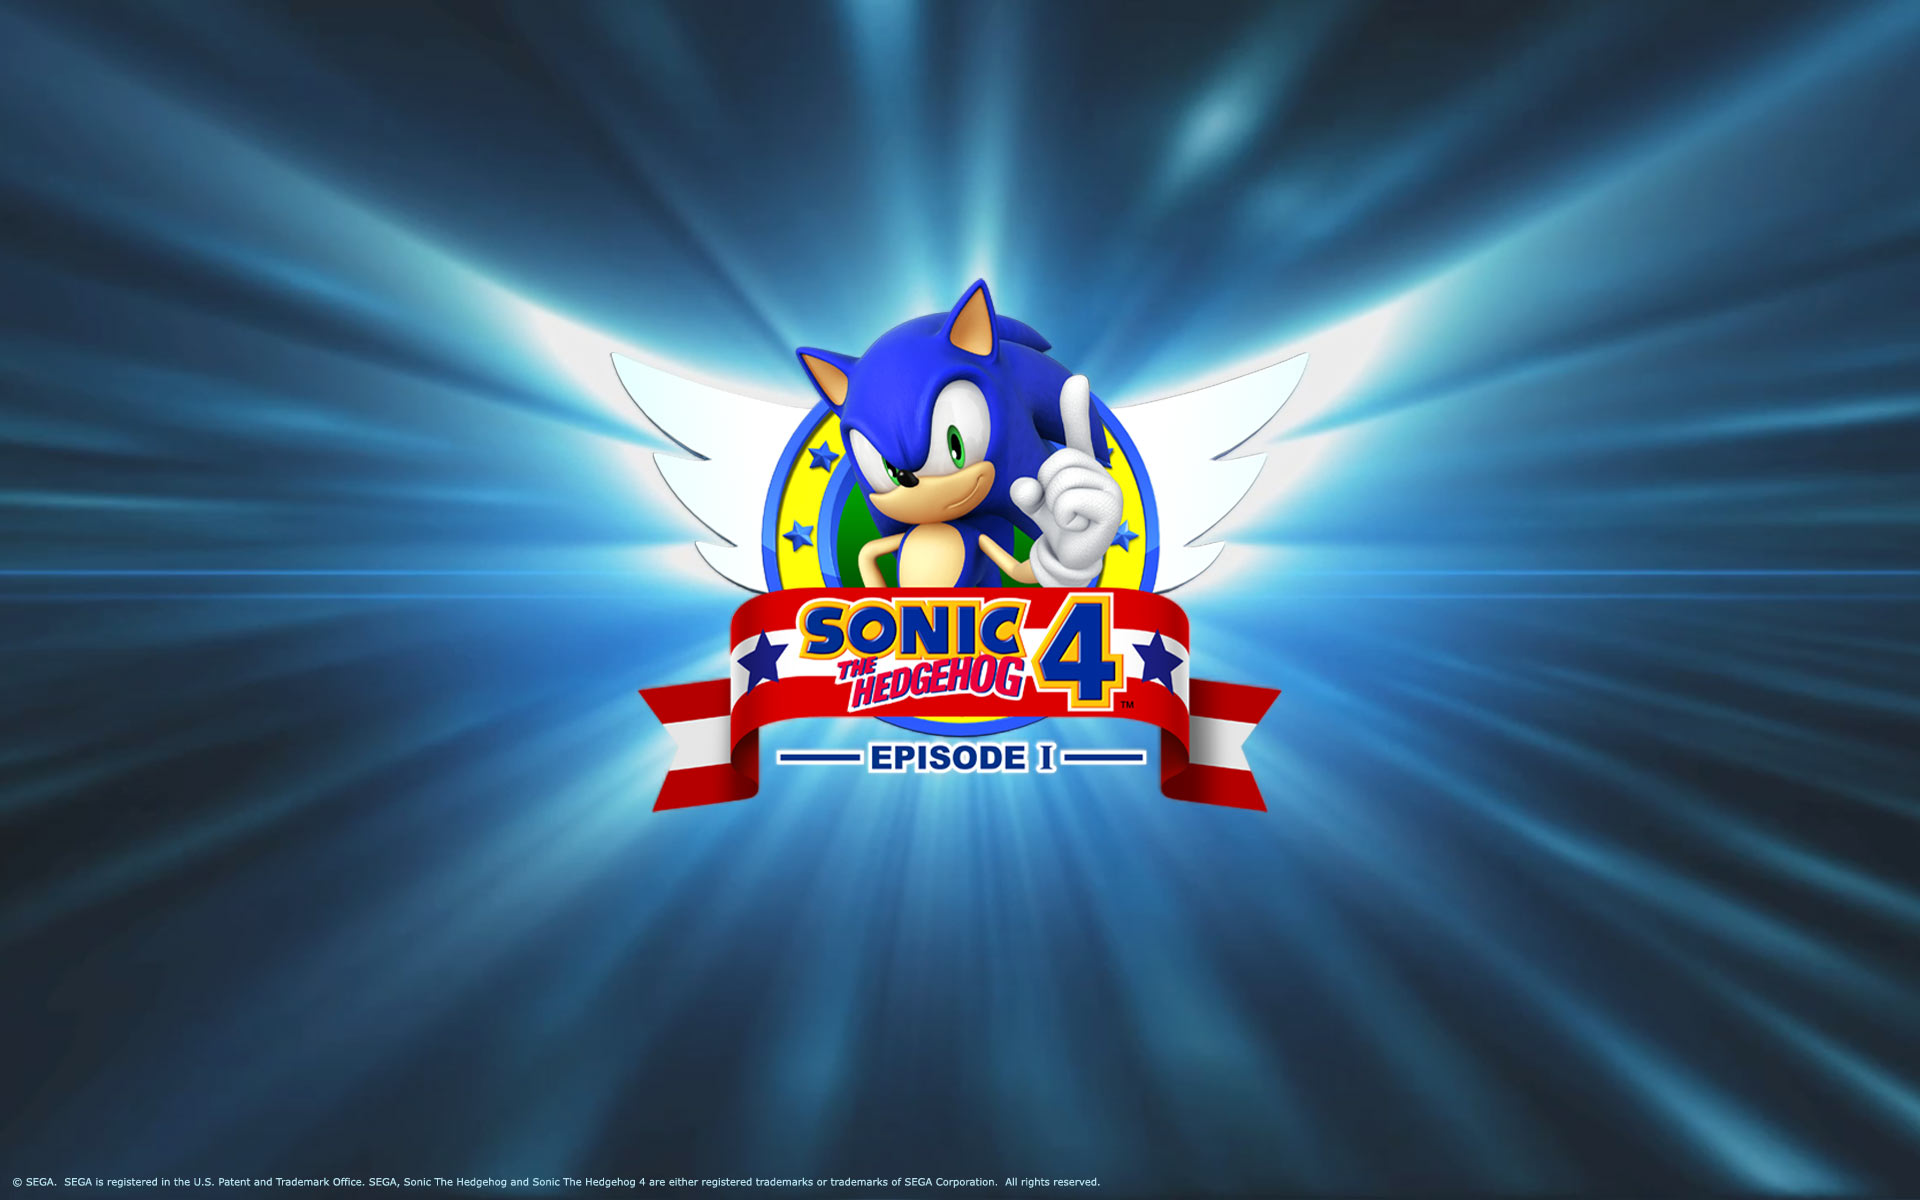 Coders Explore The Collection Sonic Video Game